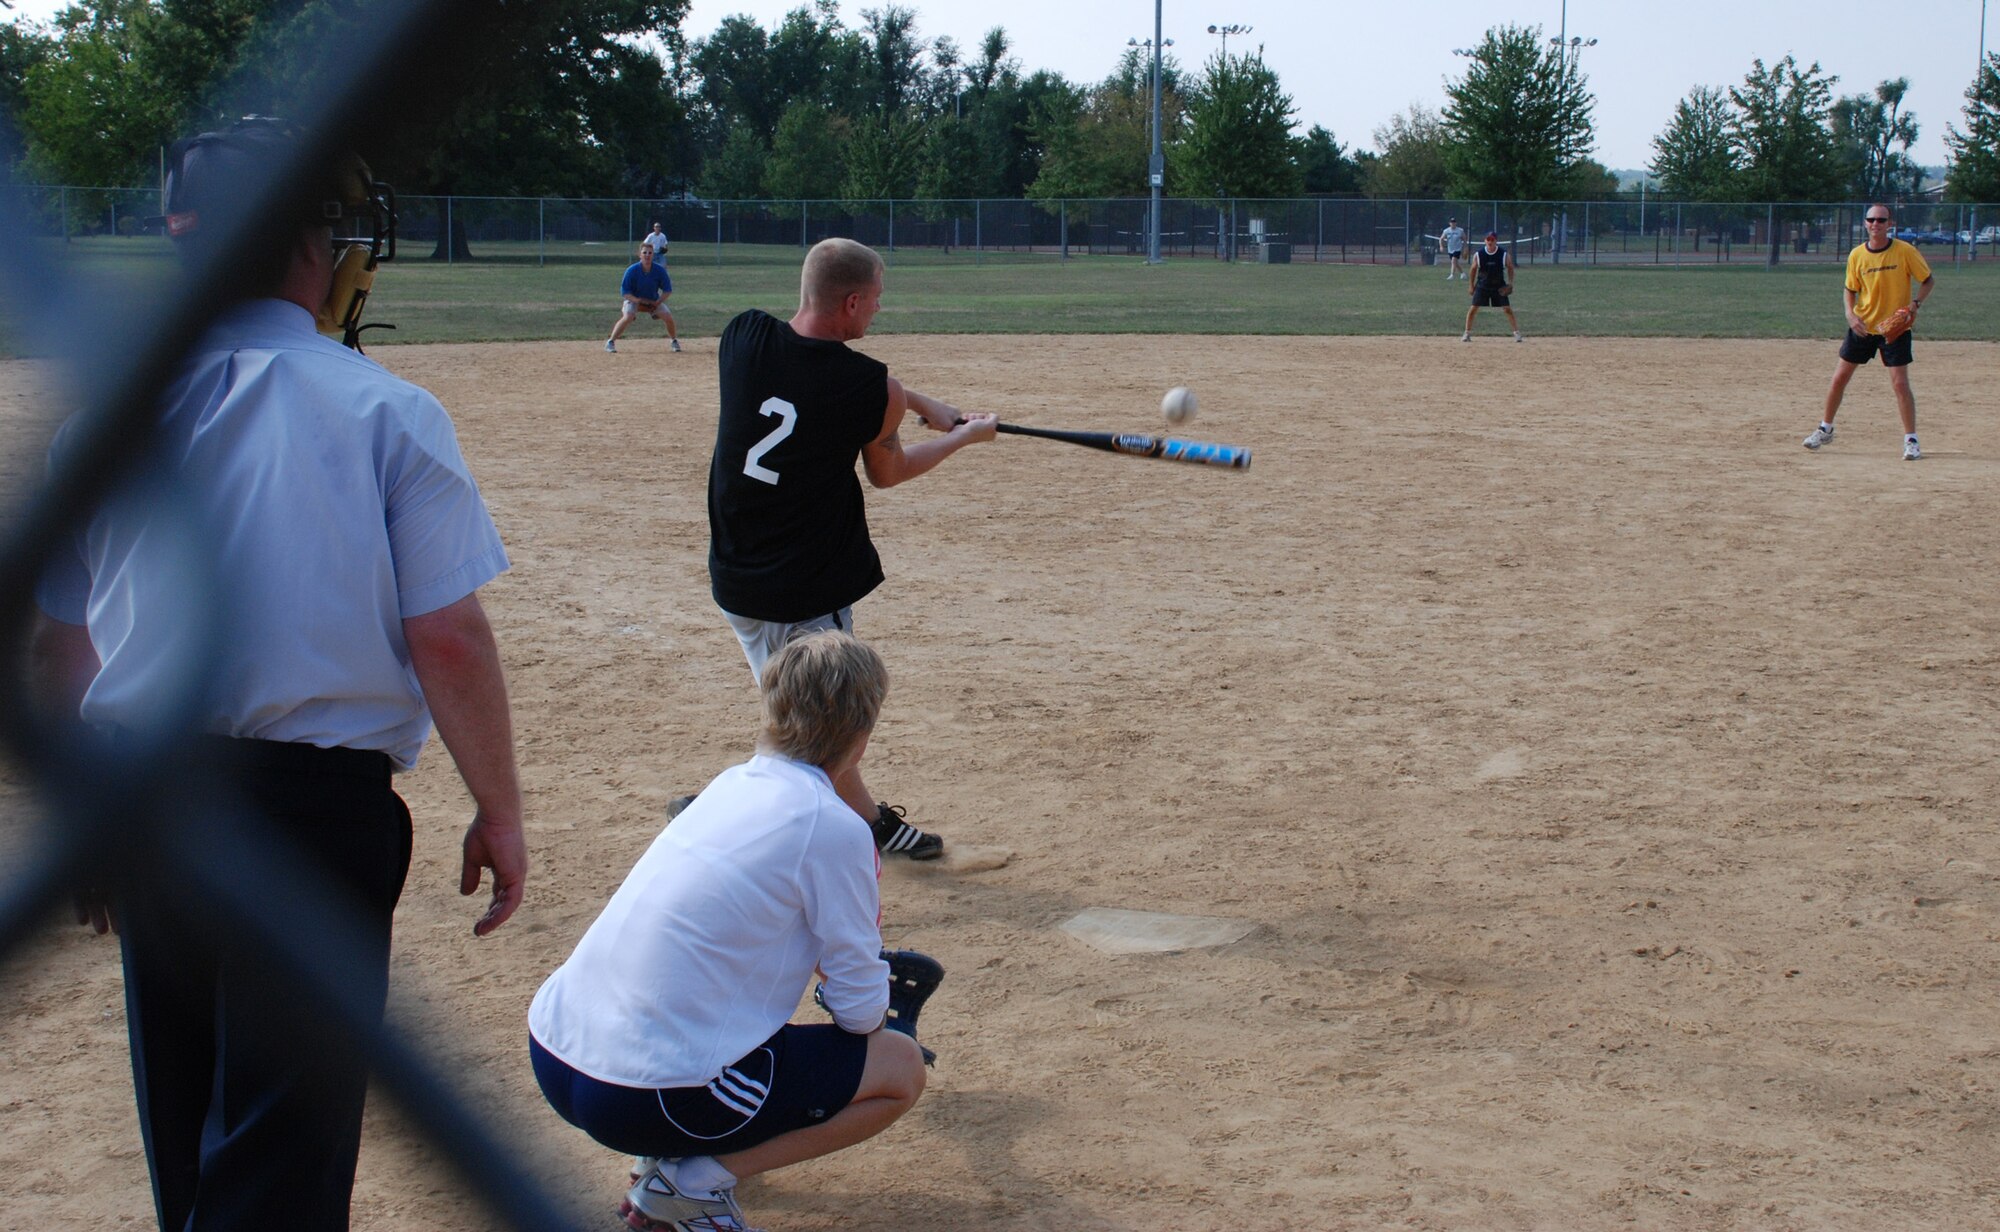 932nd says "Hey there batter!"  An officer of the 932nd Airlift Wing prepares to throw out the first pitch at the recent softball match.